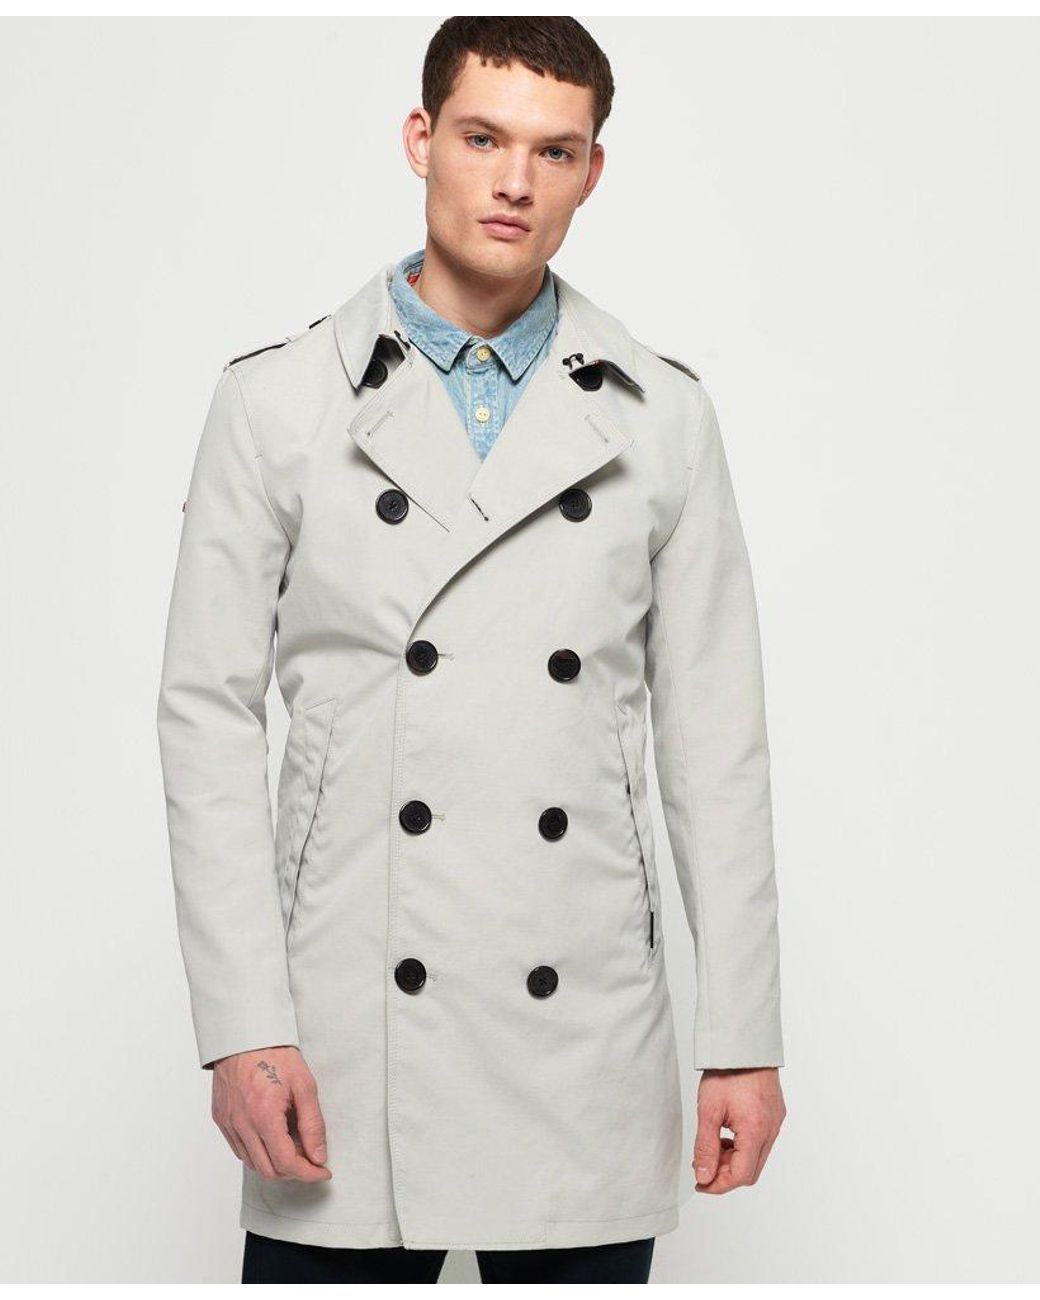 Lyst - Superdry Summer Rogue Trench Coat in Gray for Men